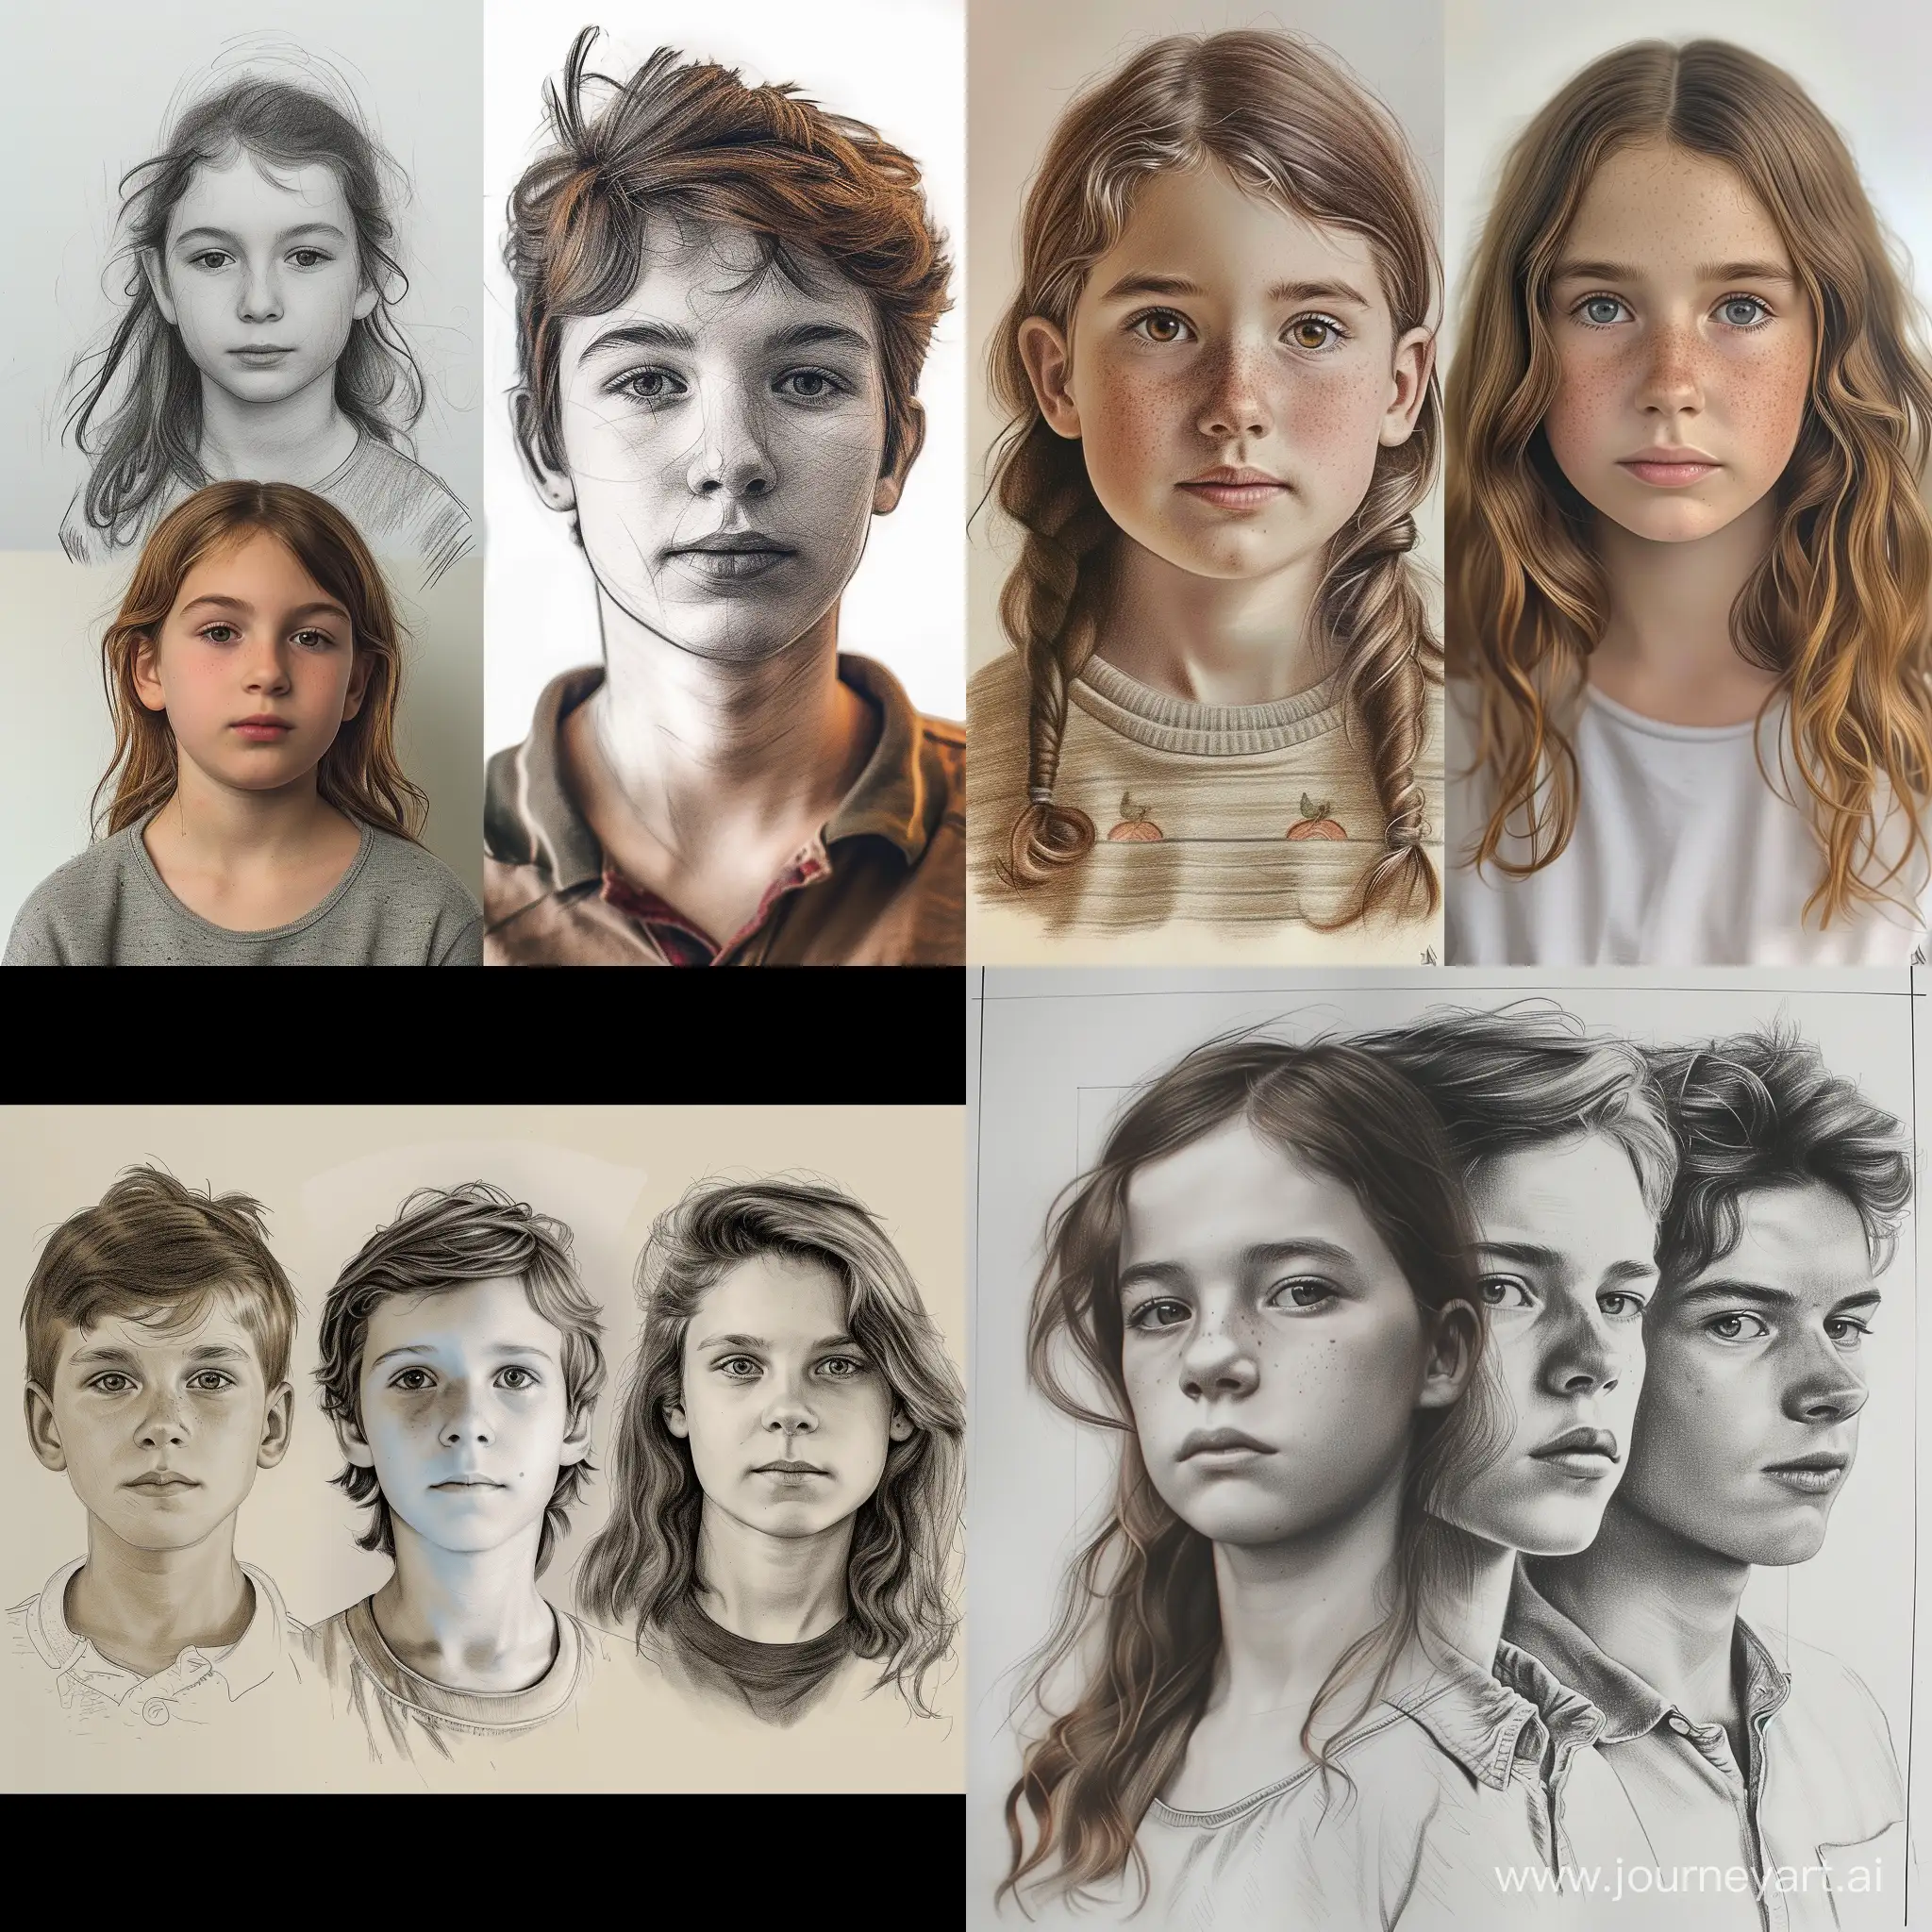 Draw a photo realistic image of an individual as a child, teenager and adult